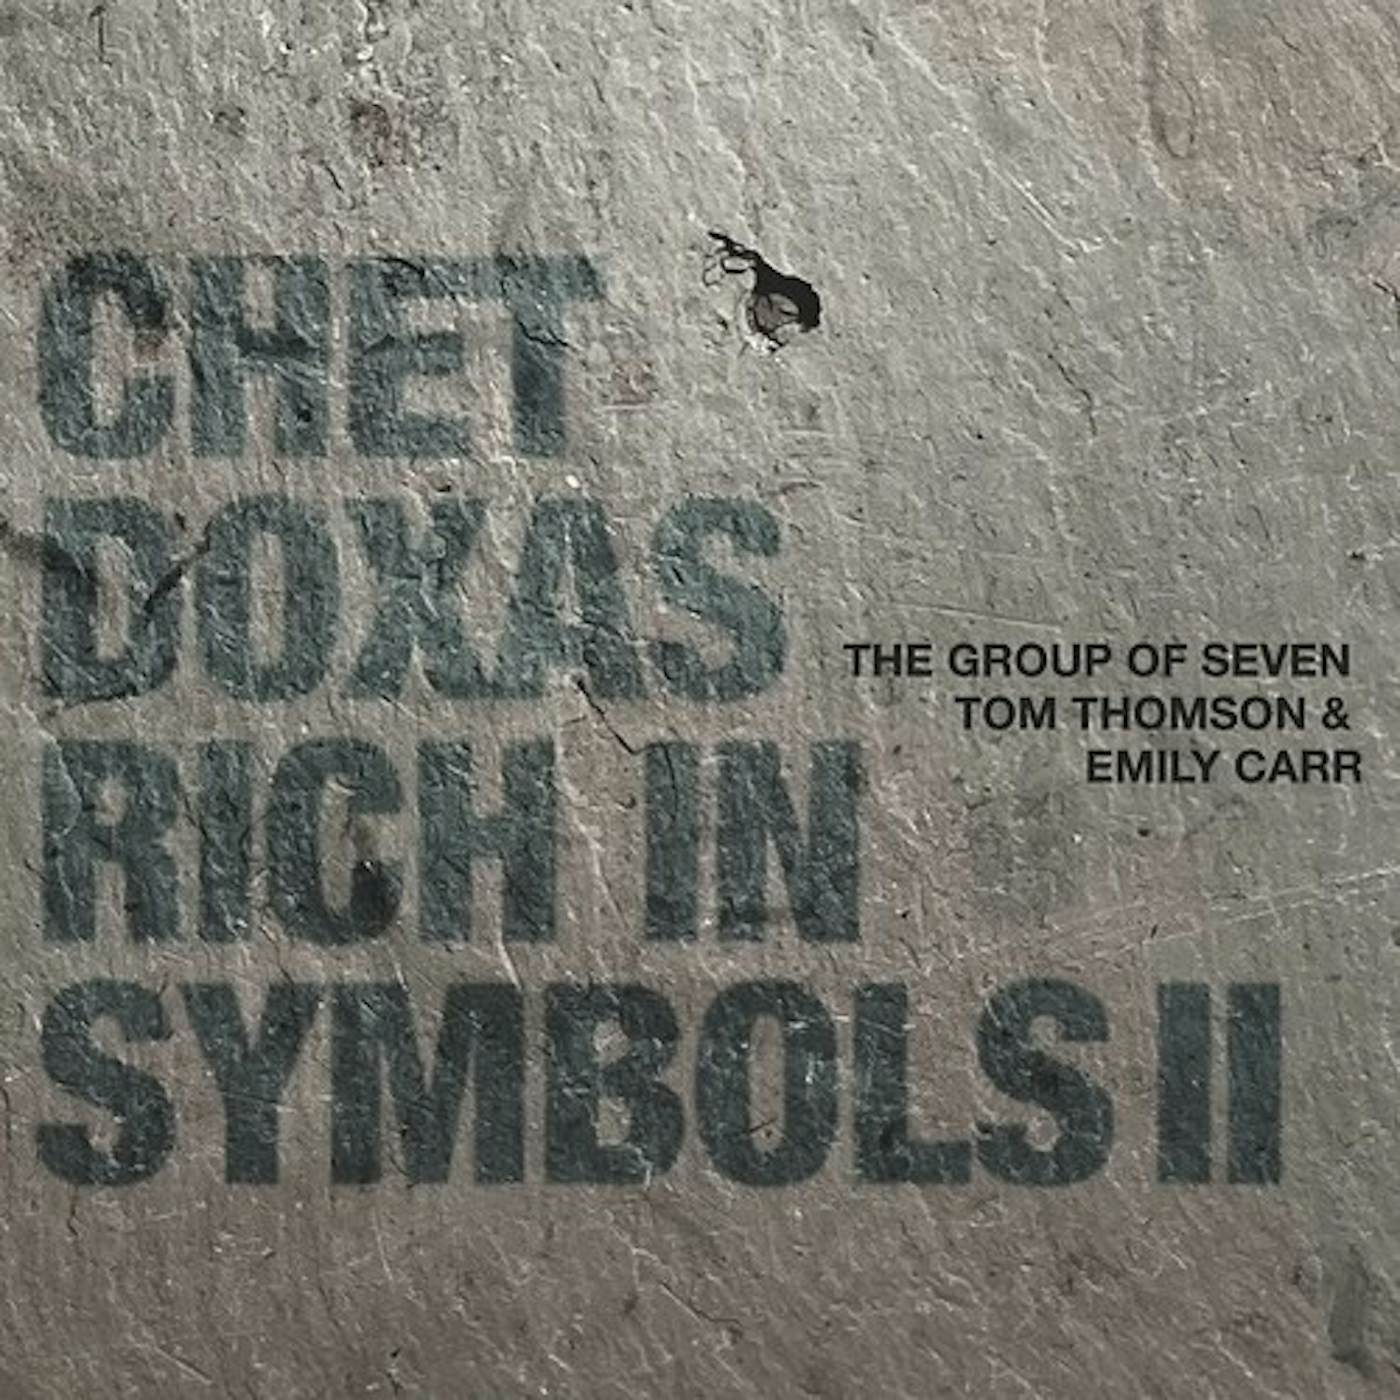 Chet Doxas RICH IN SYMBOLS II - GROUP OF SEVEN TOM THOMSON & CD